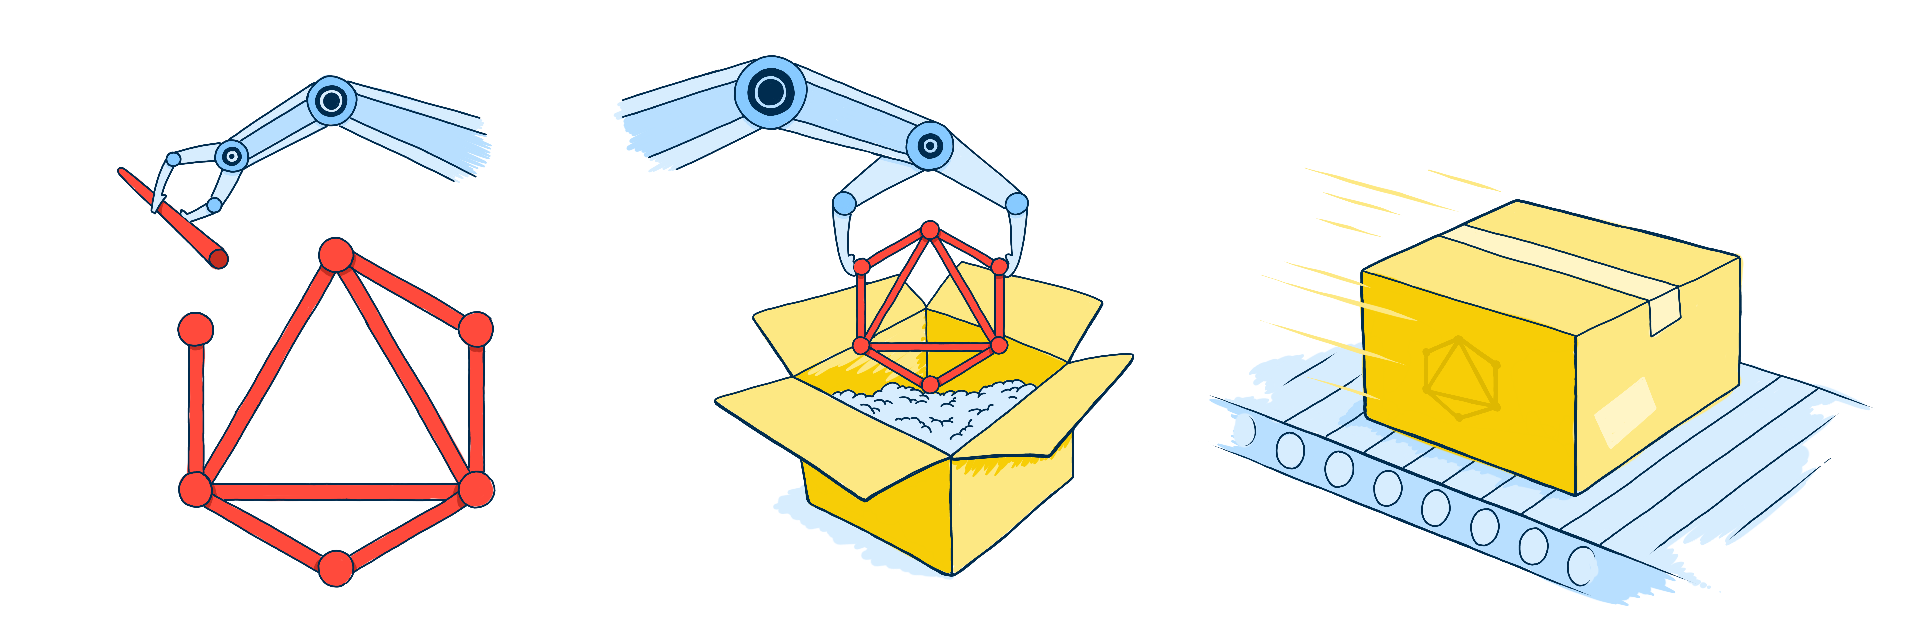 Illustration of a GraphQL symbol being assembled, packaged into a box, and then shipped out on a conveyor belt